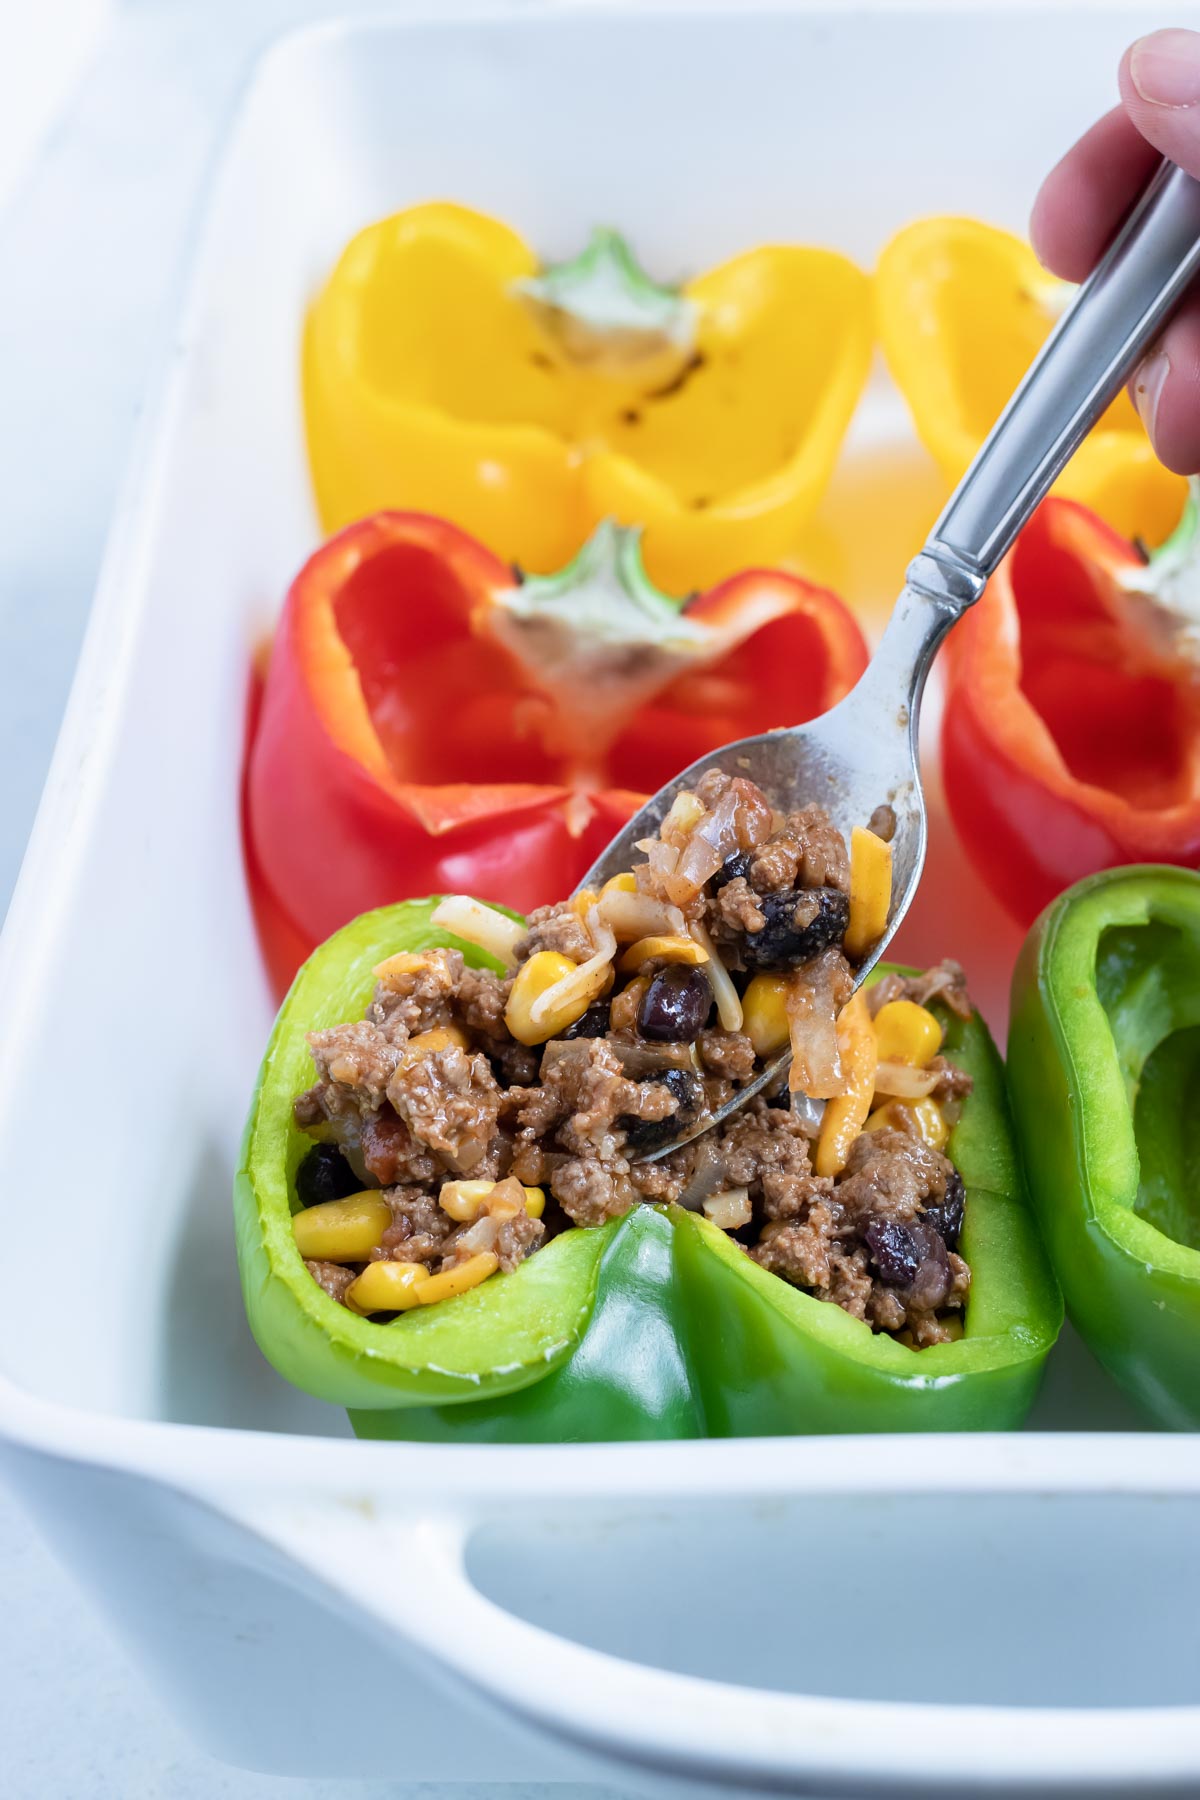 Cheese is added to the stuffed bell pepper filling.